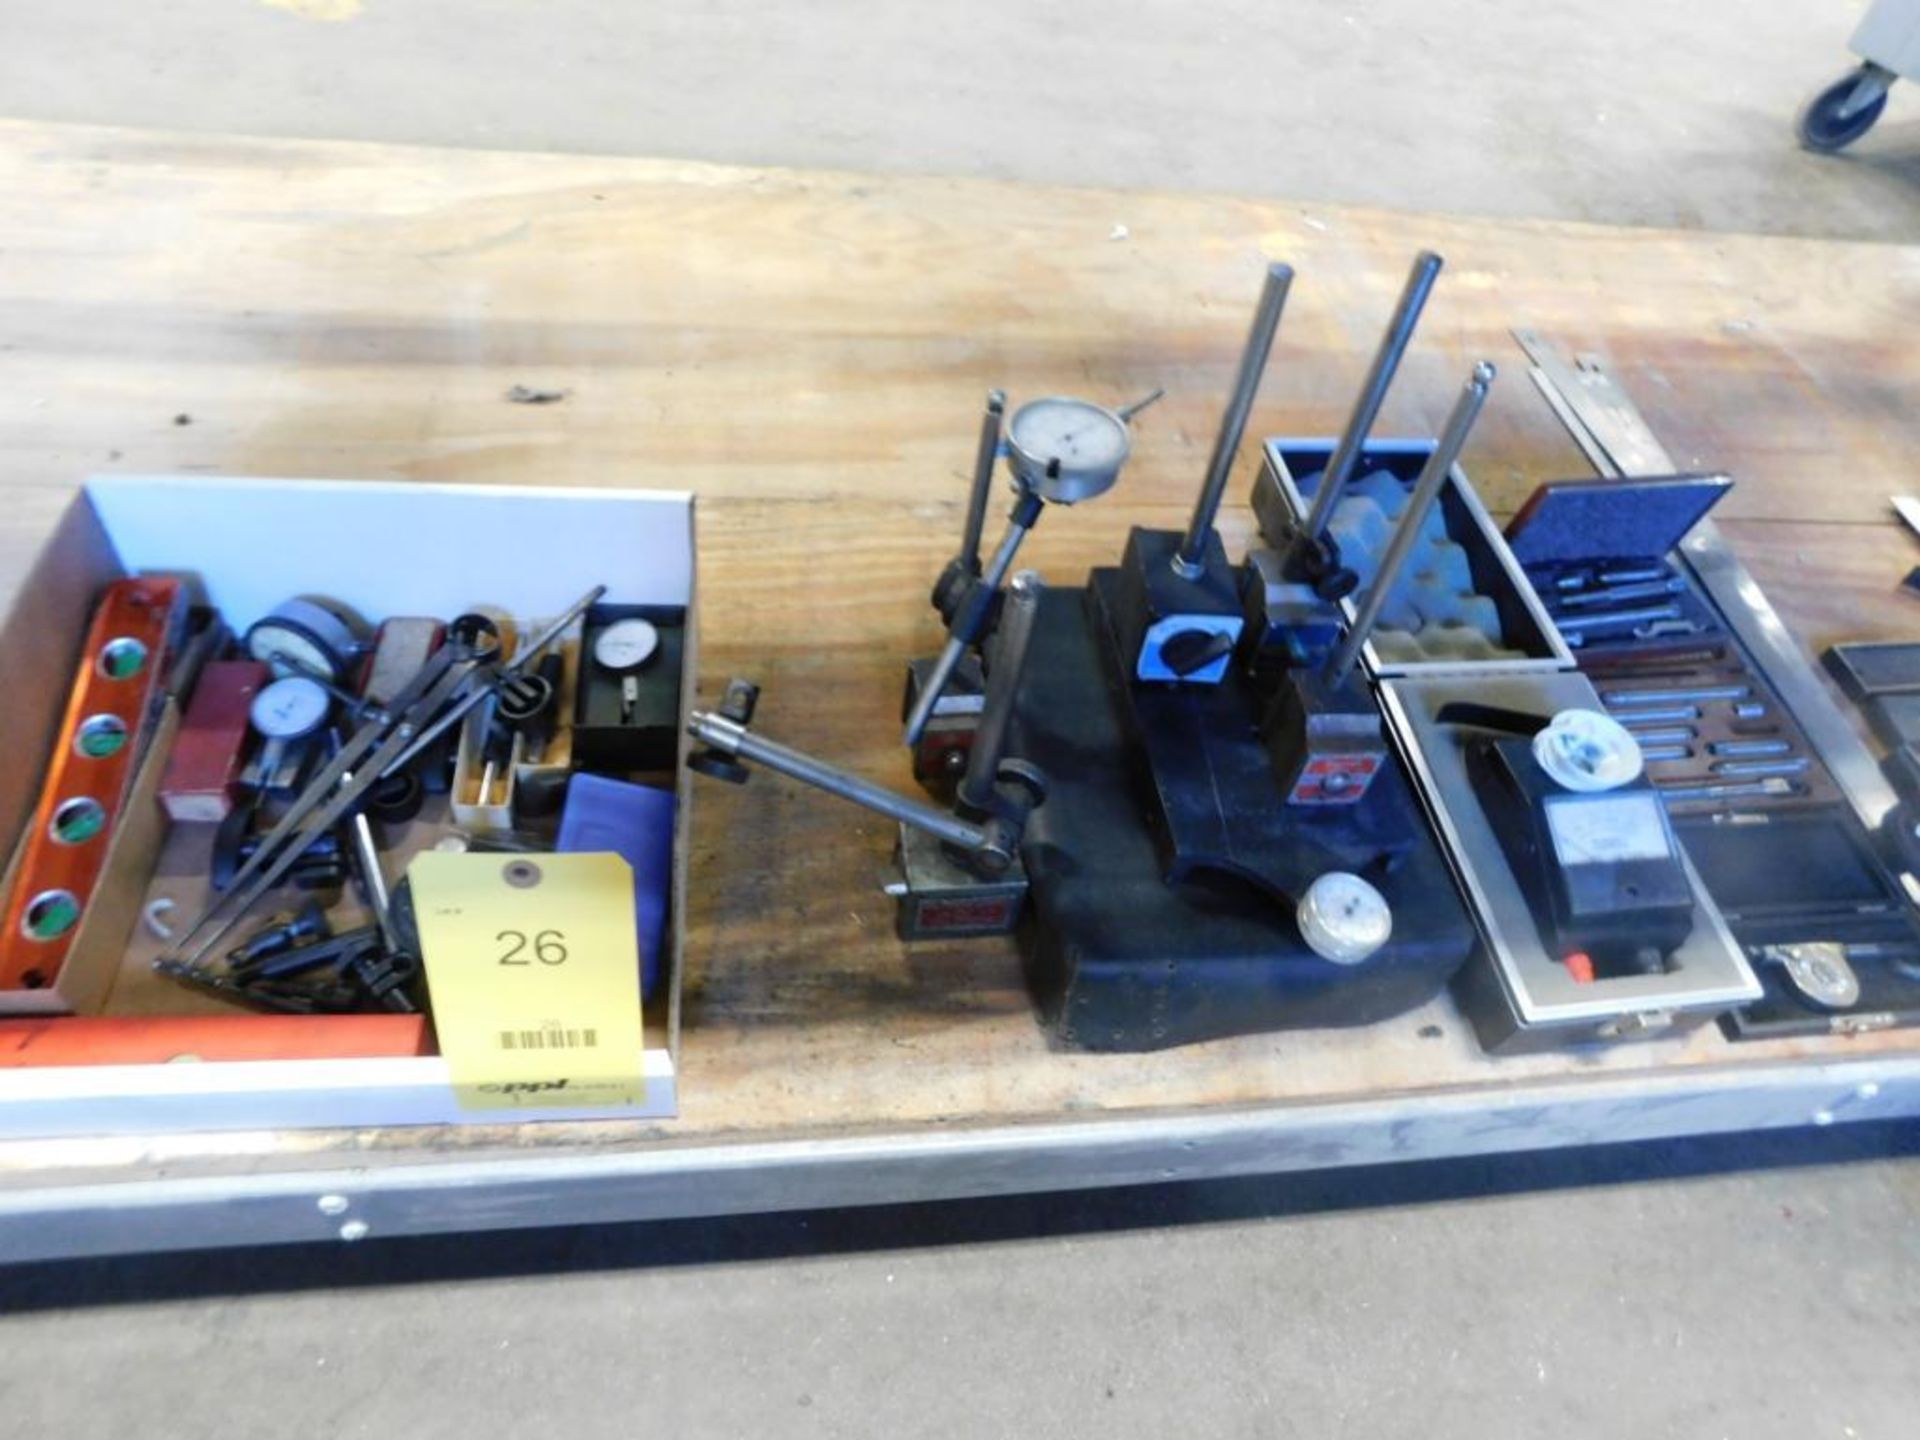 LOT: Dial Indicator Gauges, Magnetic Stands, Assorted Squares, Protractors & Parallel Blocks